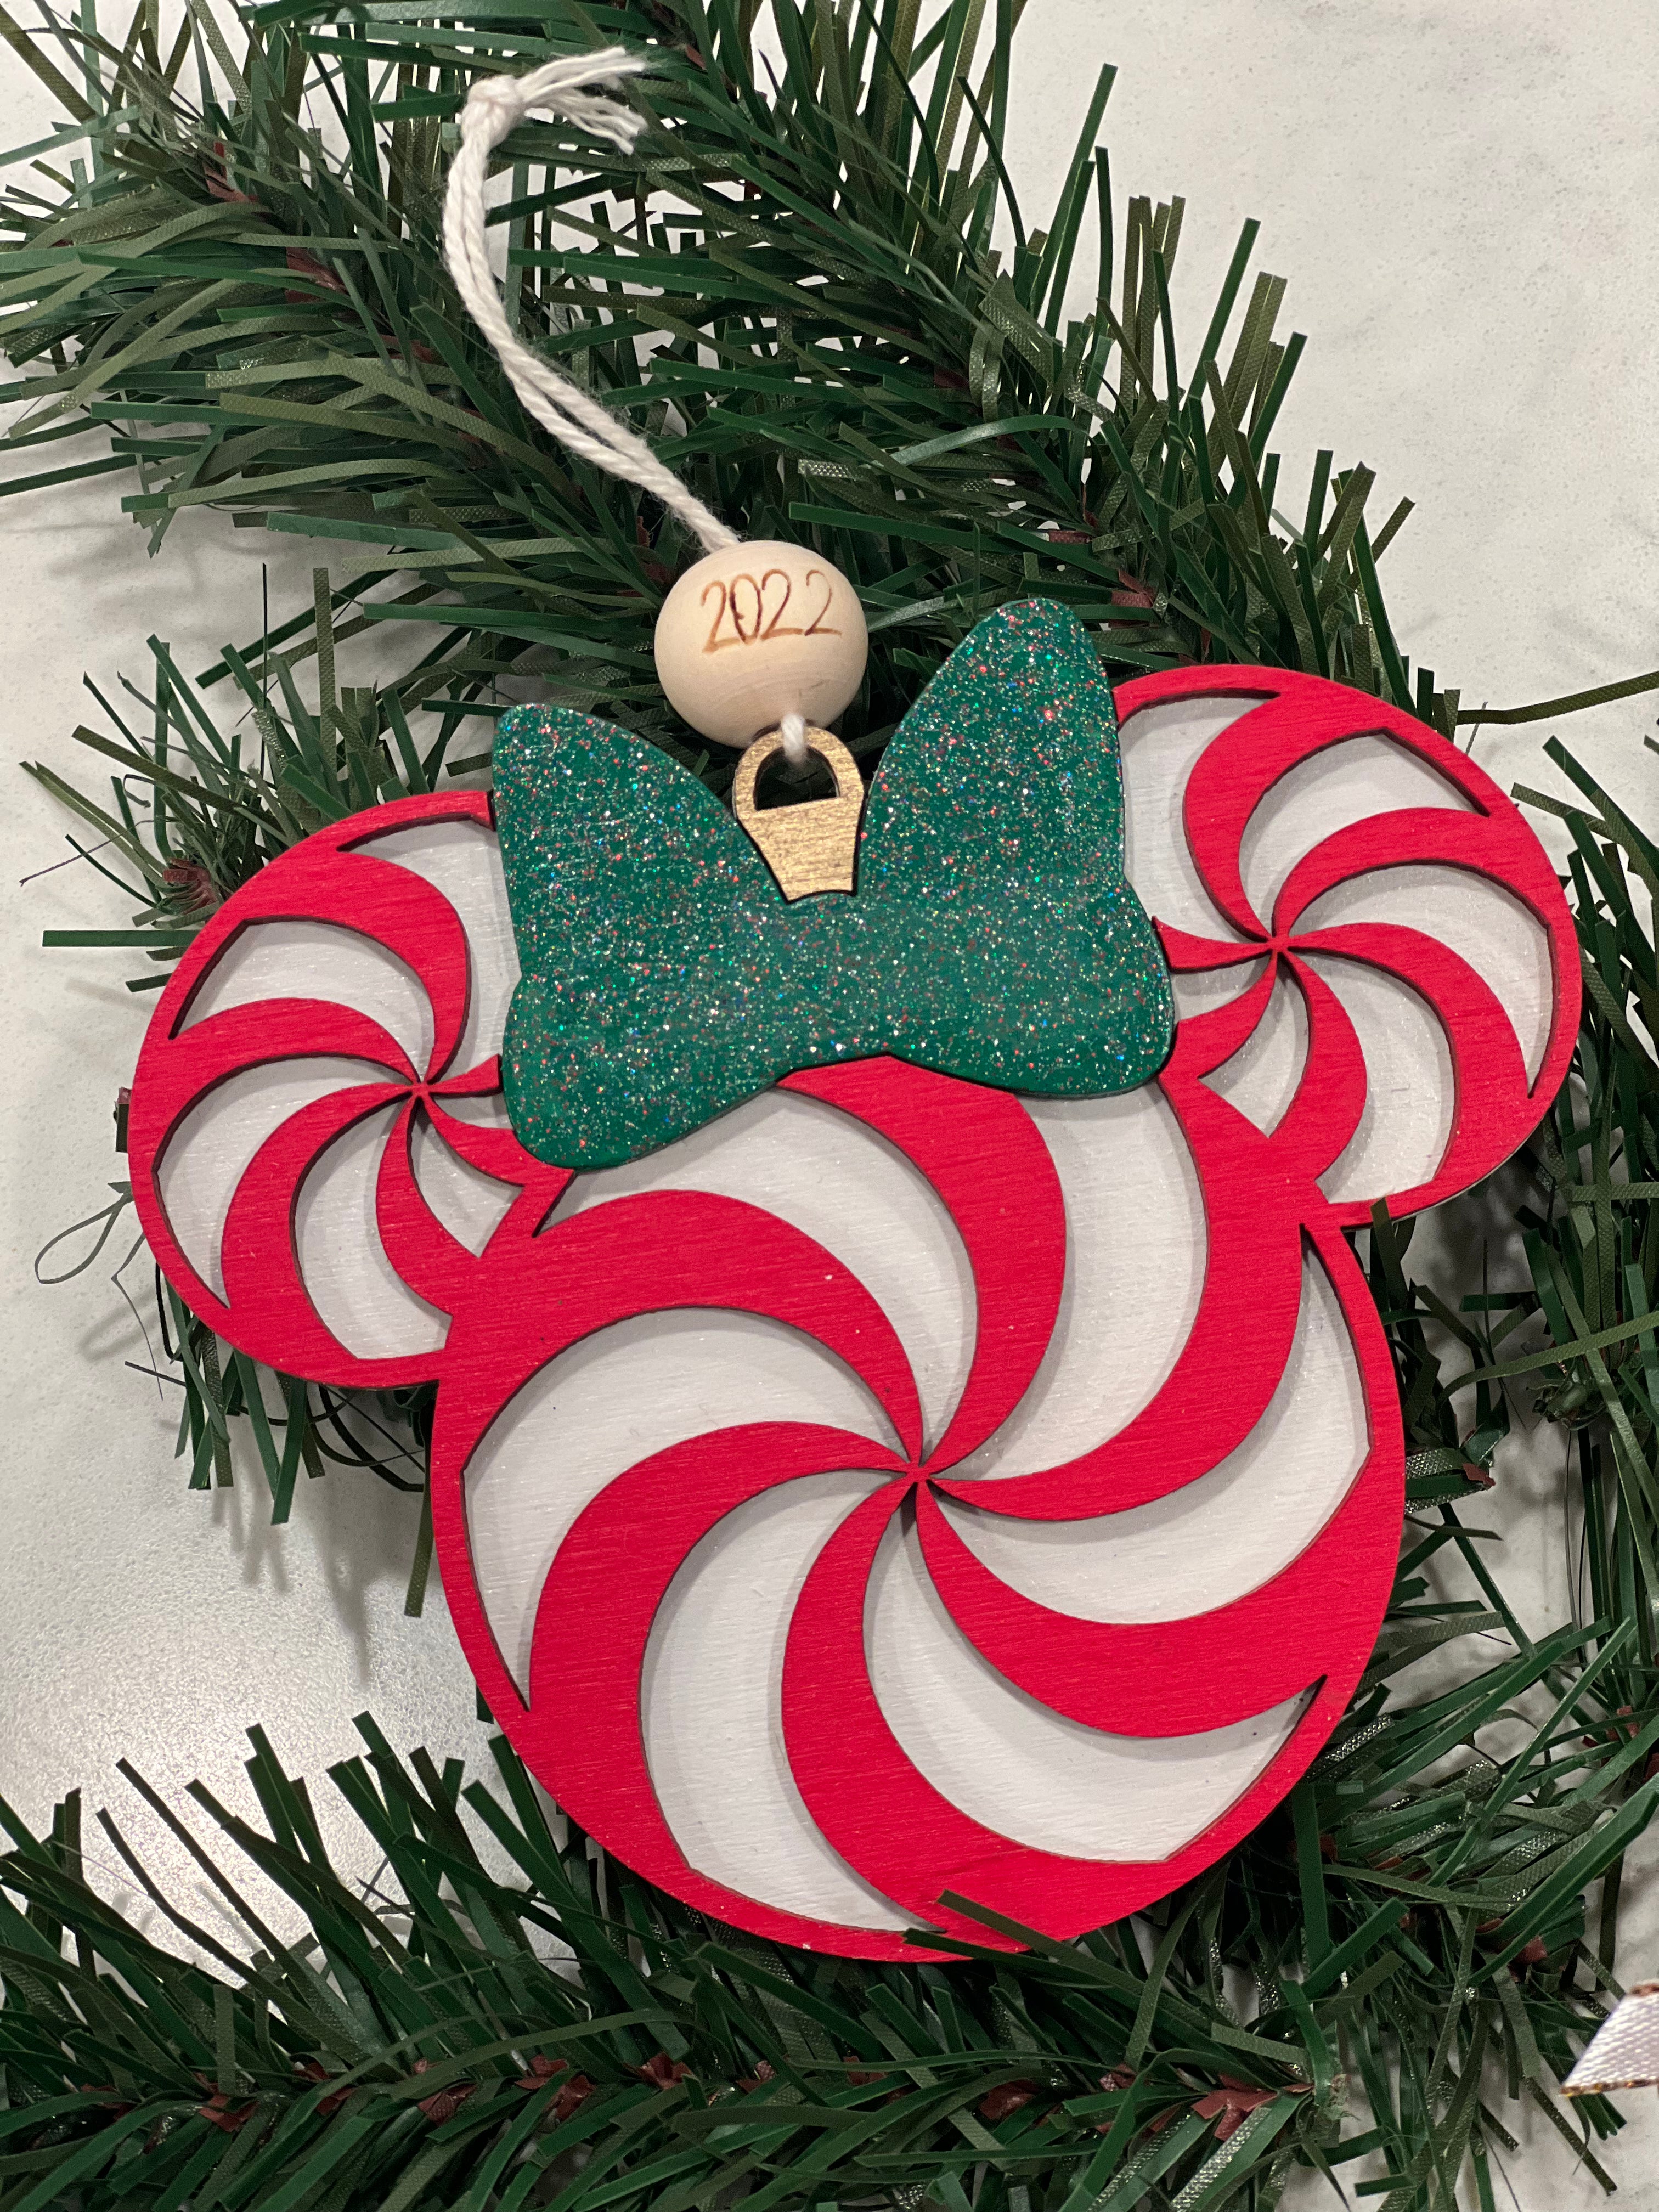 Candy Cane Mouse Ornaments